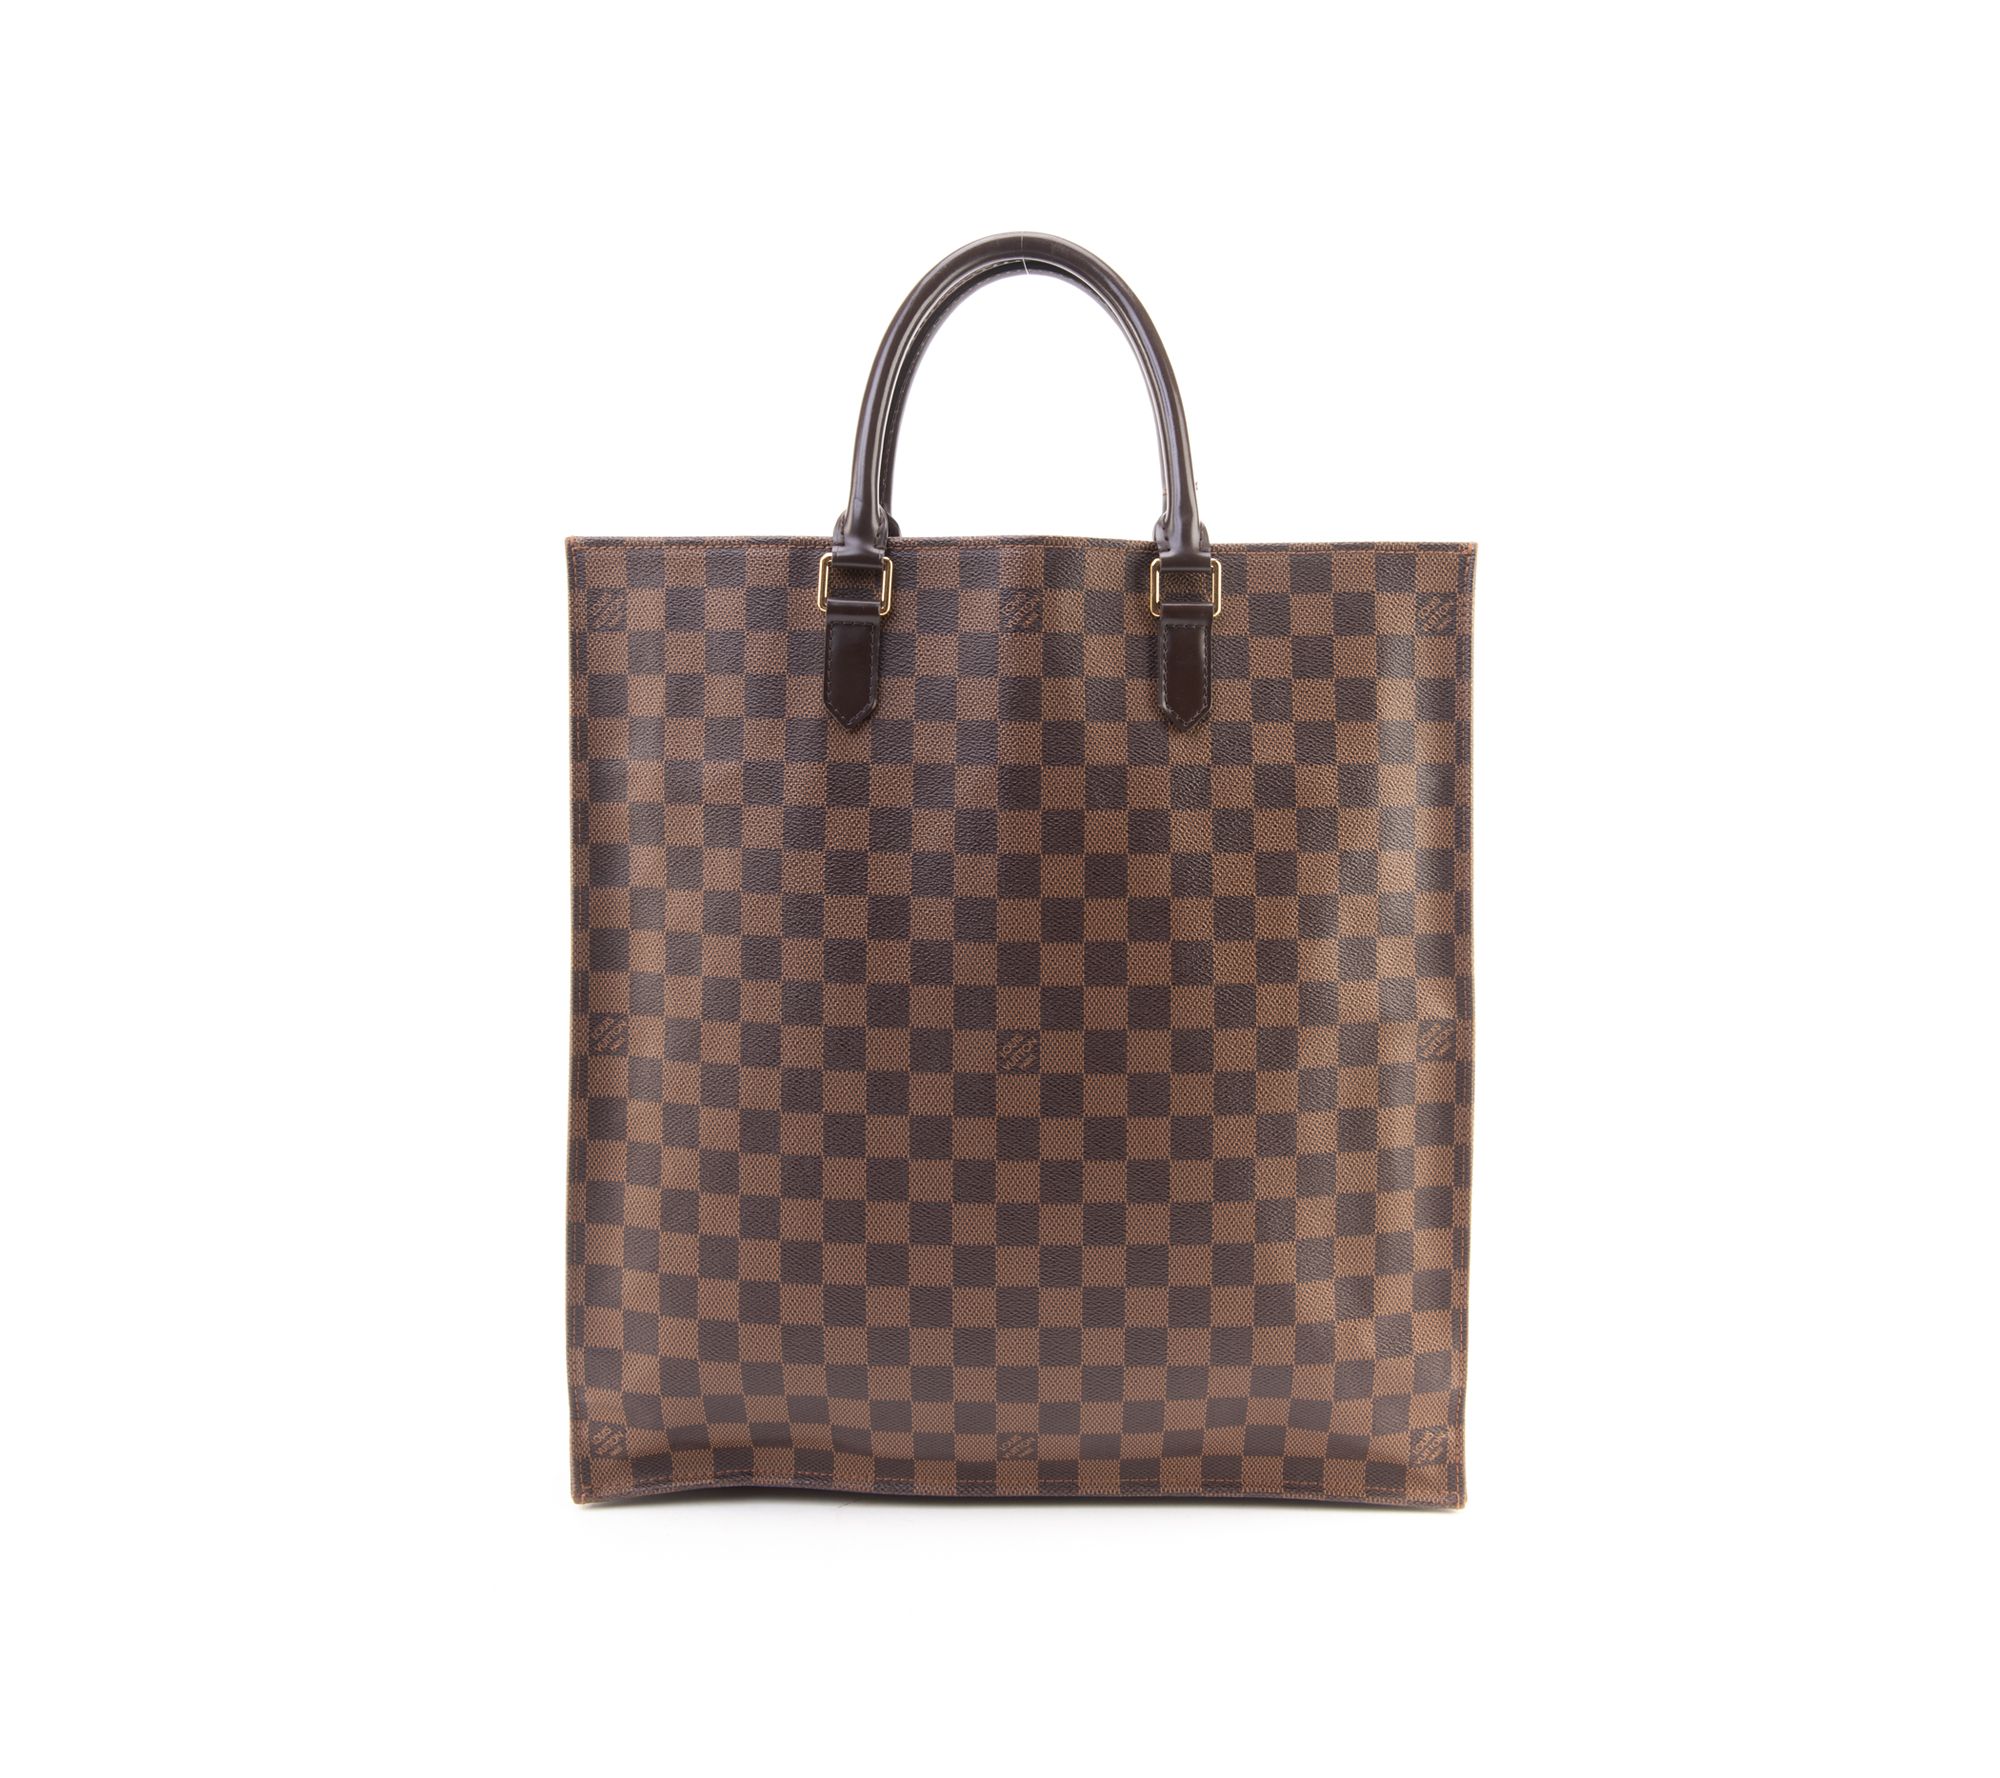 Sold out ** Louis Vuitton Damier Sac Plat Tote Bag. This item is